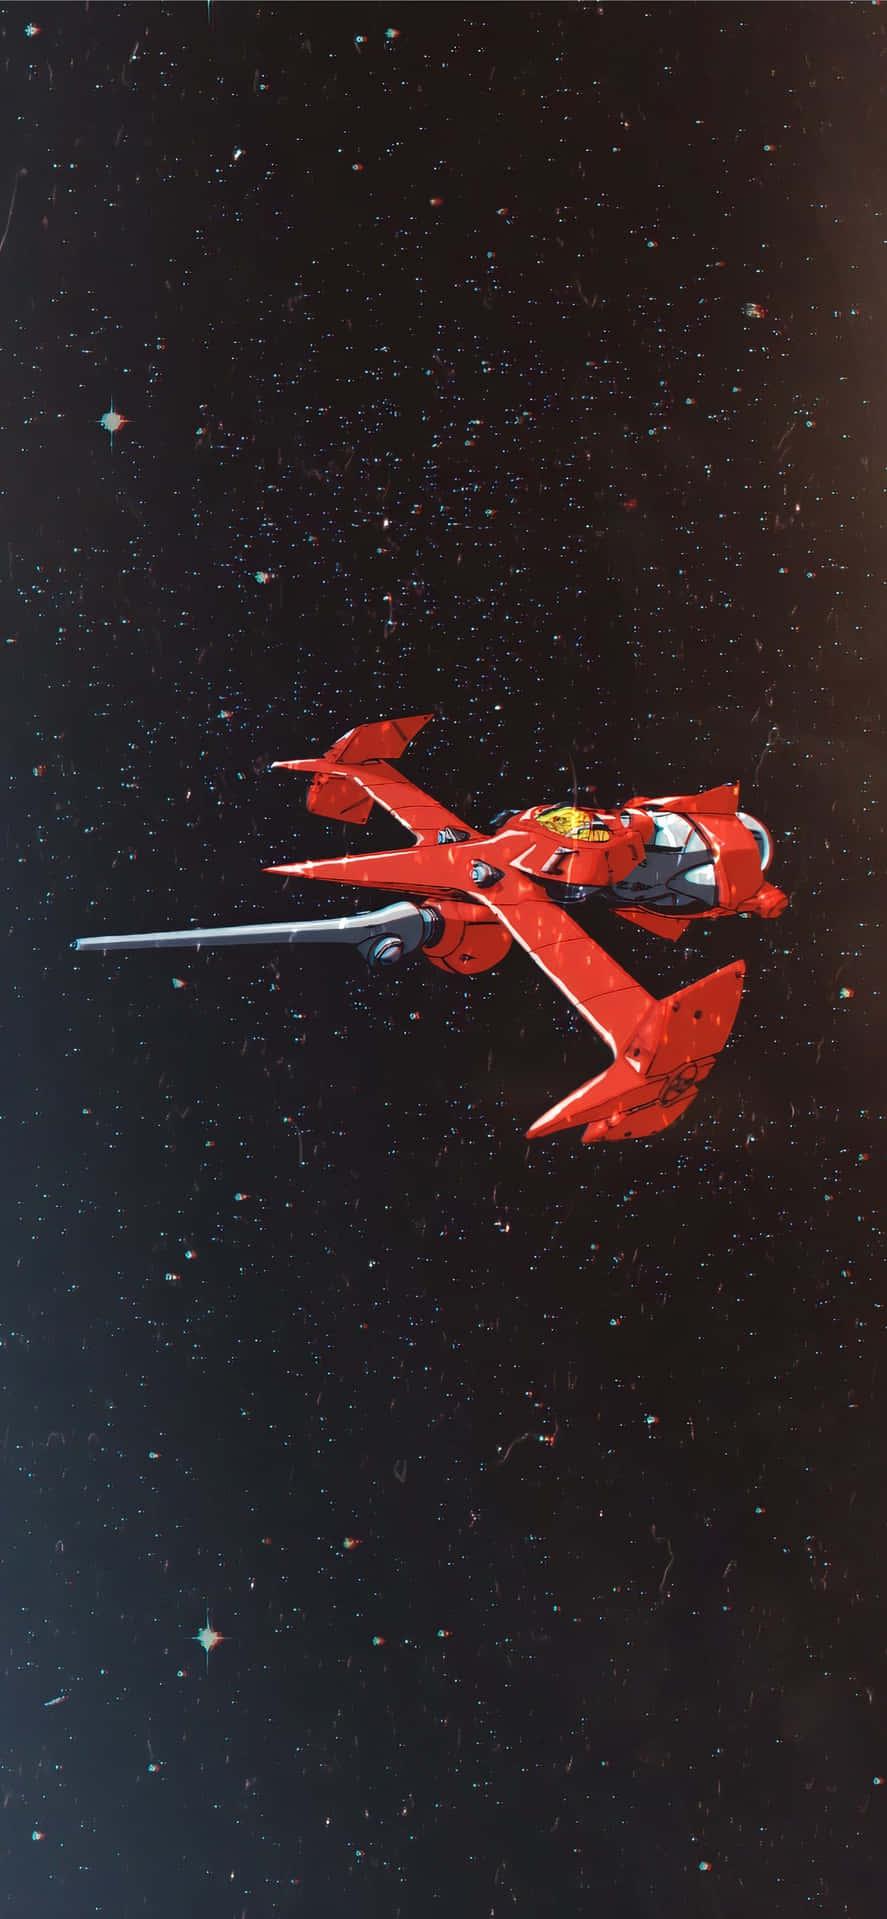 Fly Through The Spaceways With Cowboy Bebop On Your